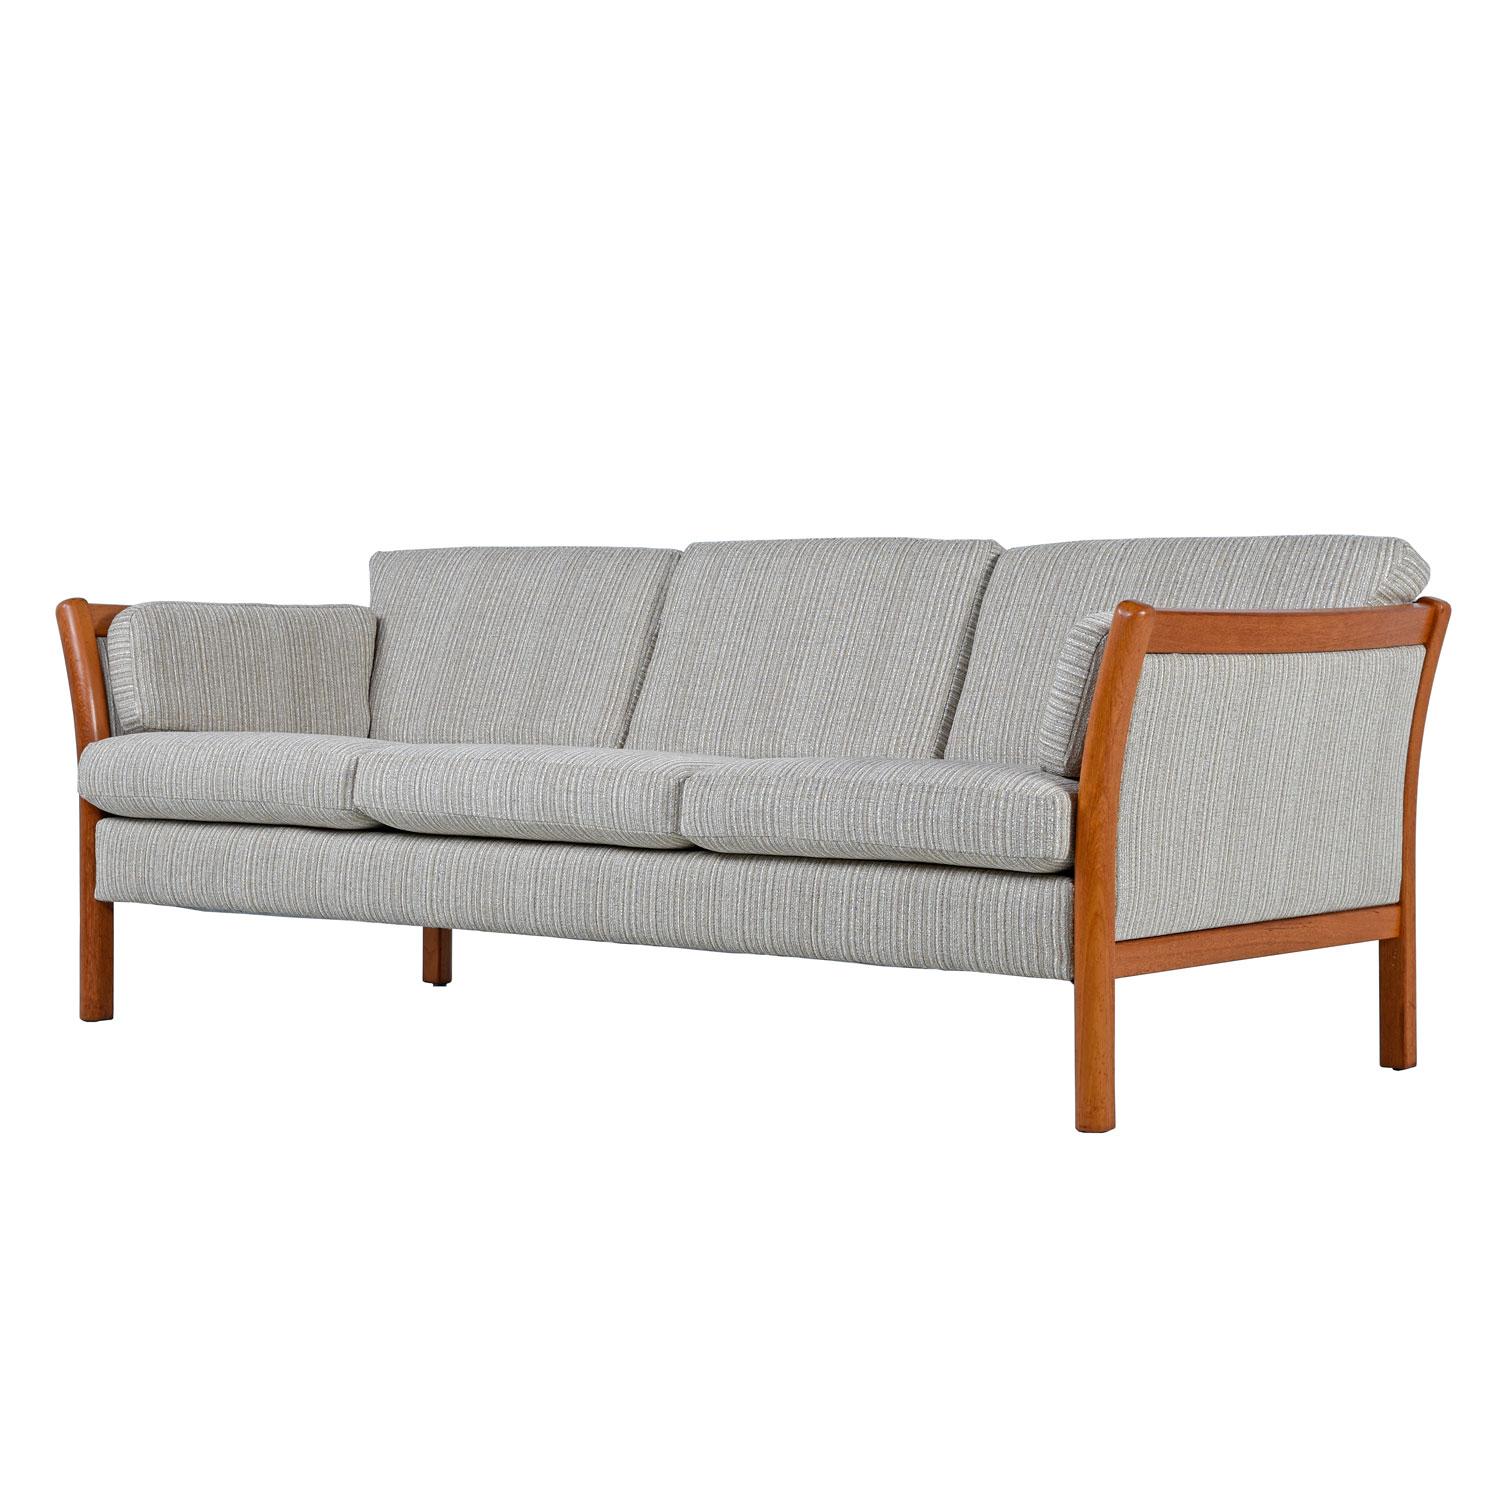 Stouby Sofa 3-Seat Couch – Danish Modern Sofa with Teak Frame